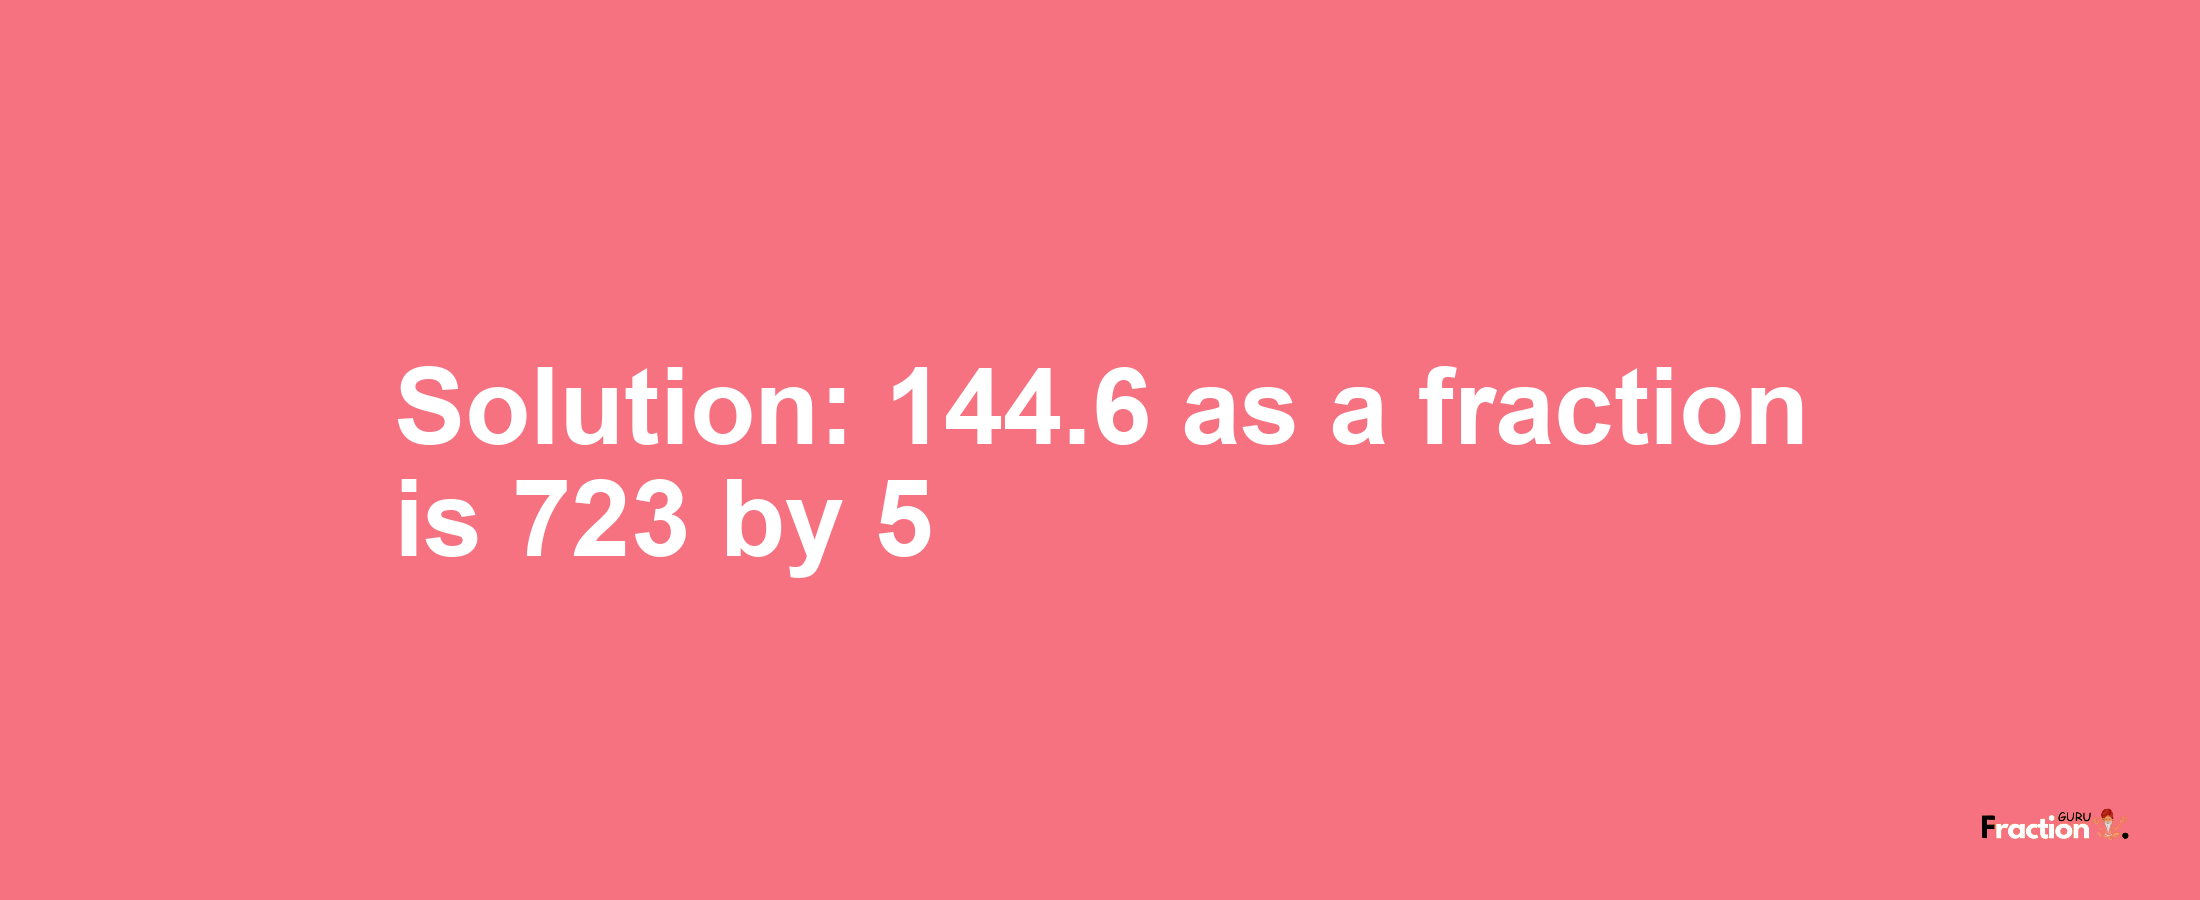 Solution:144.6 as a fraction is 723/5